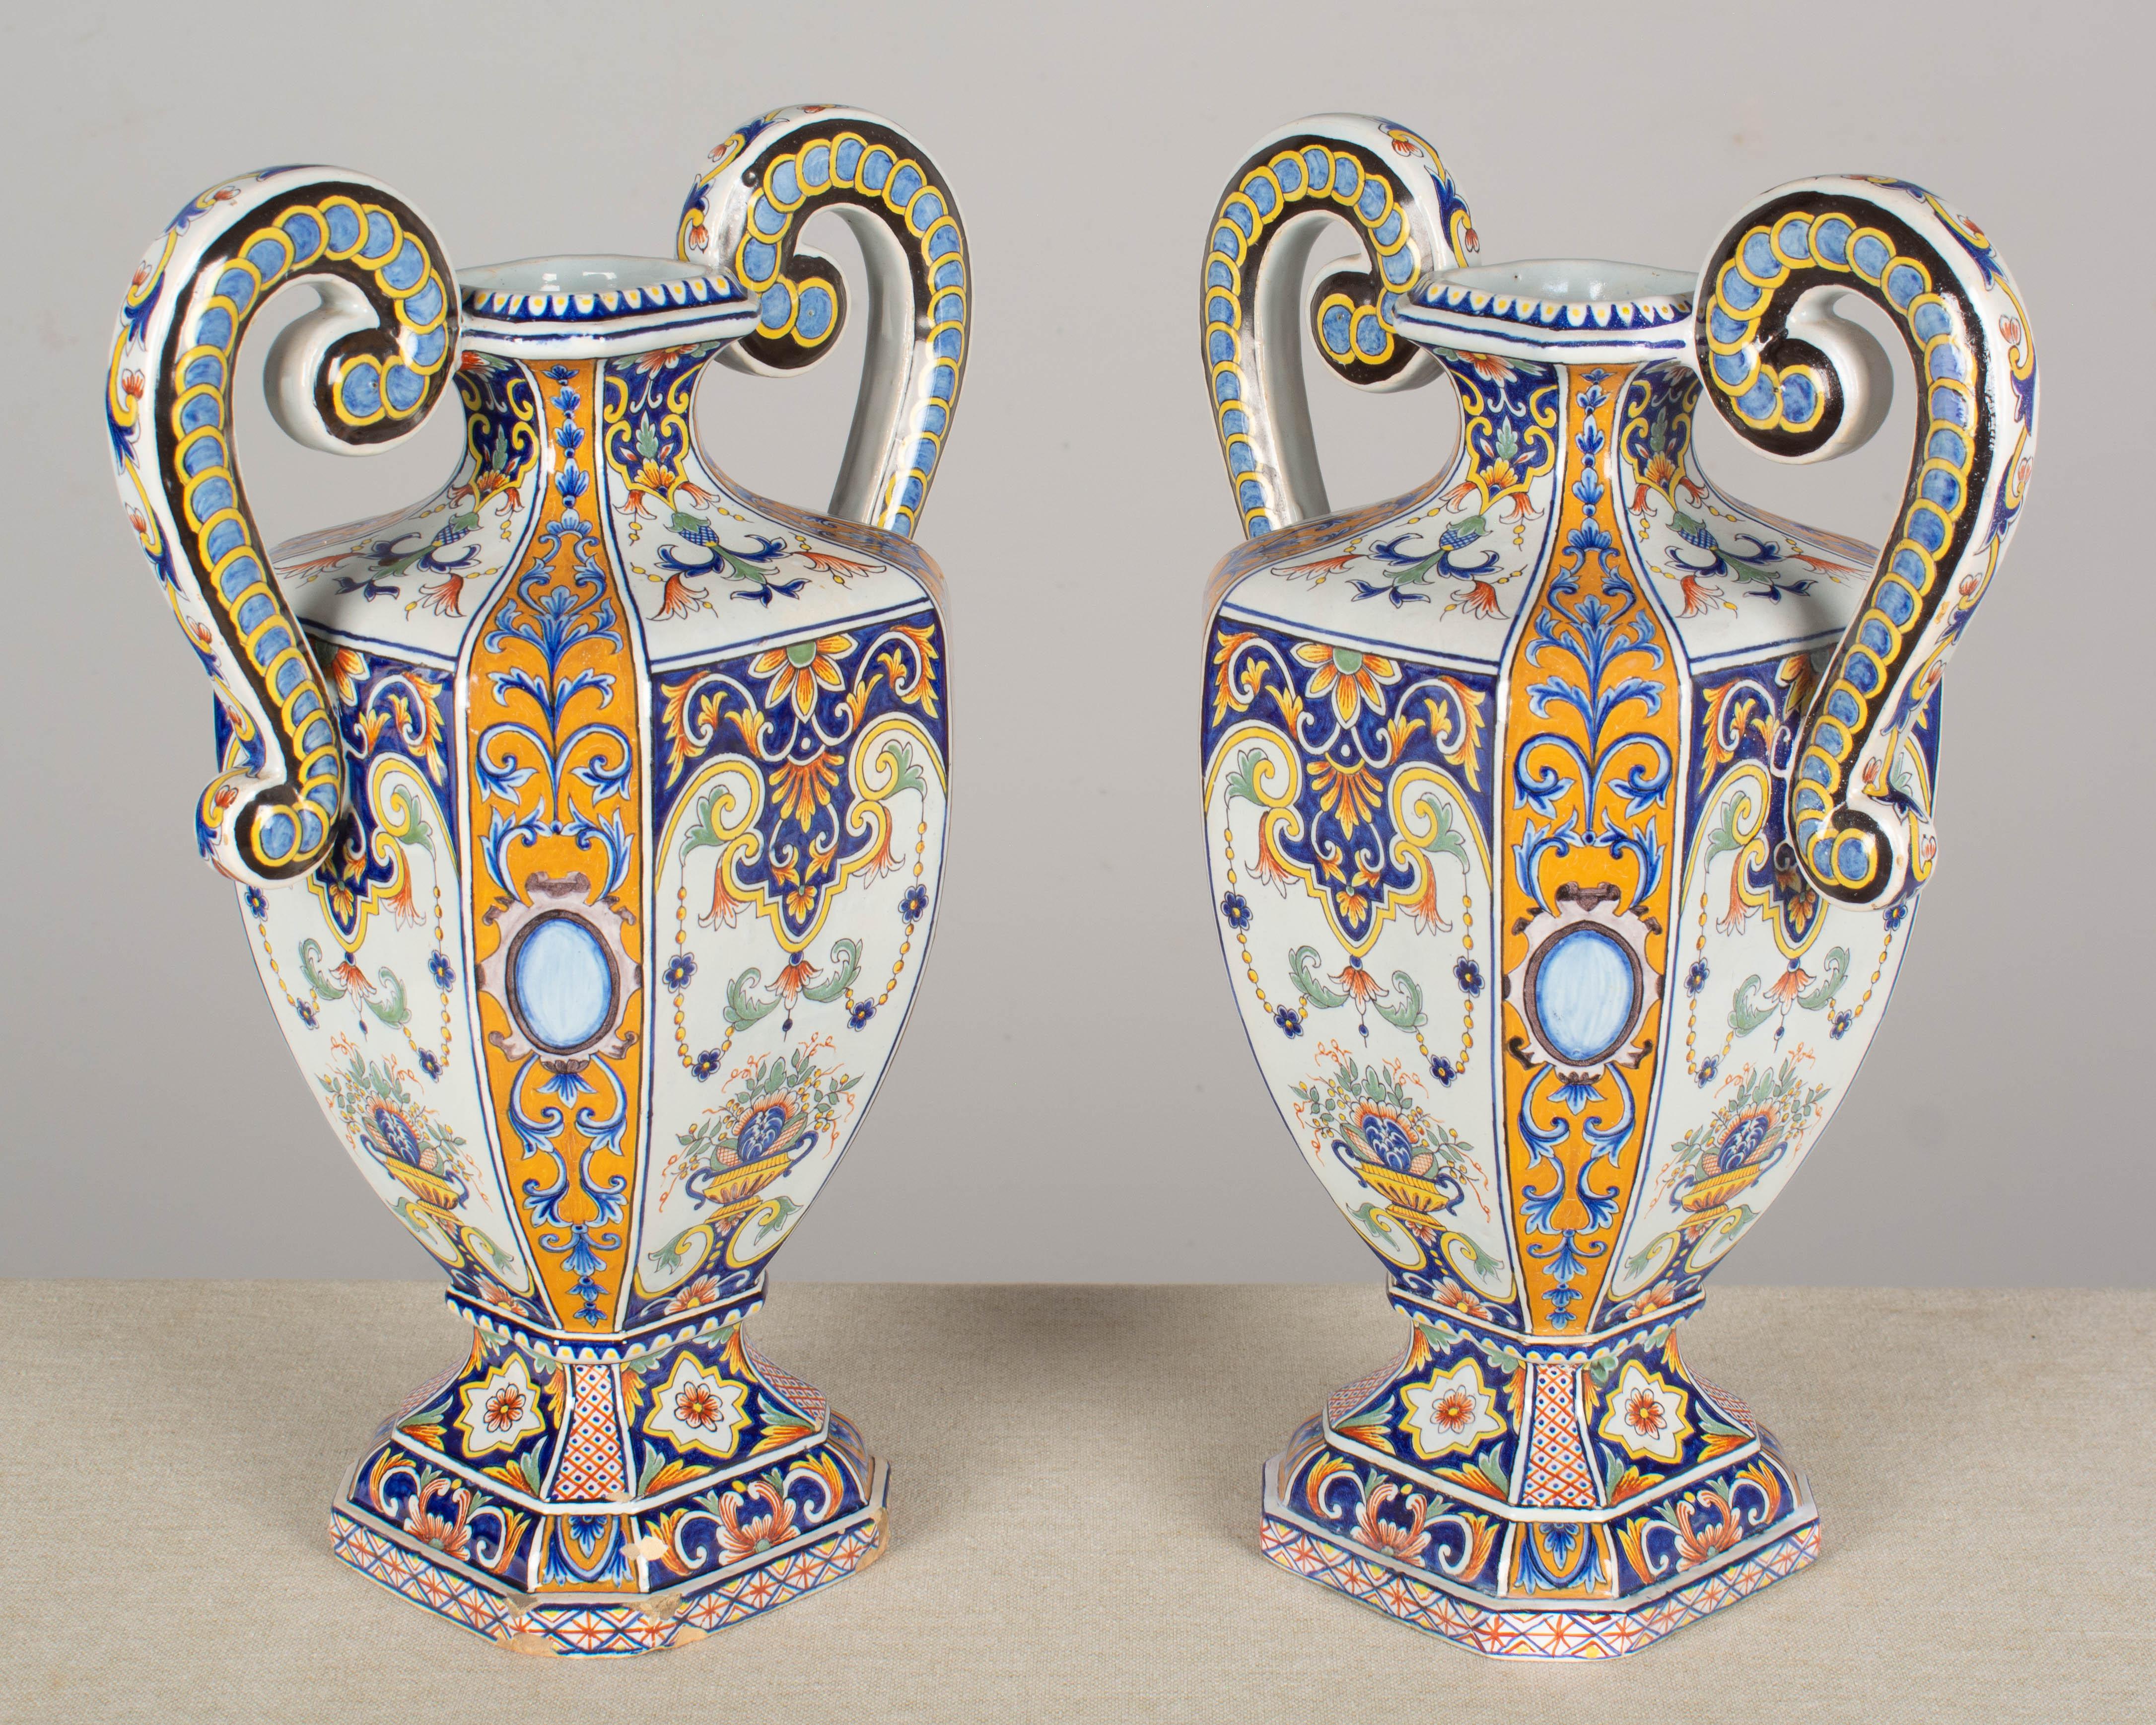 19th Century French Desvres Faience Urn Form Vases, a Pair For Sale 2